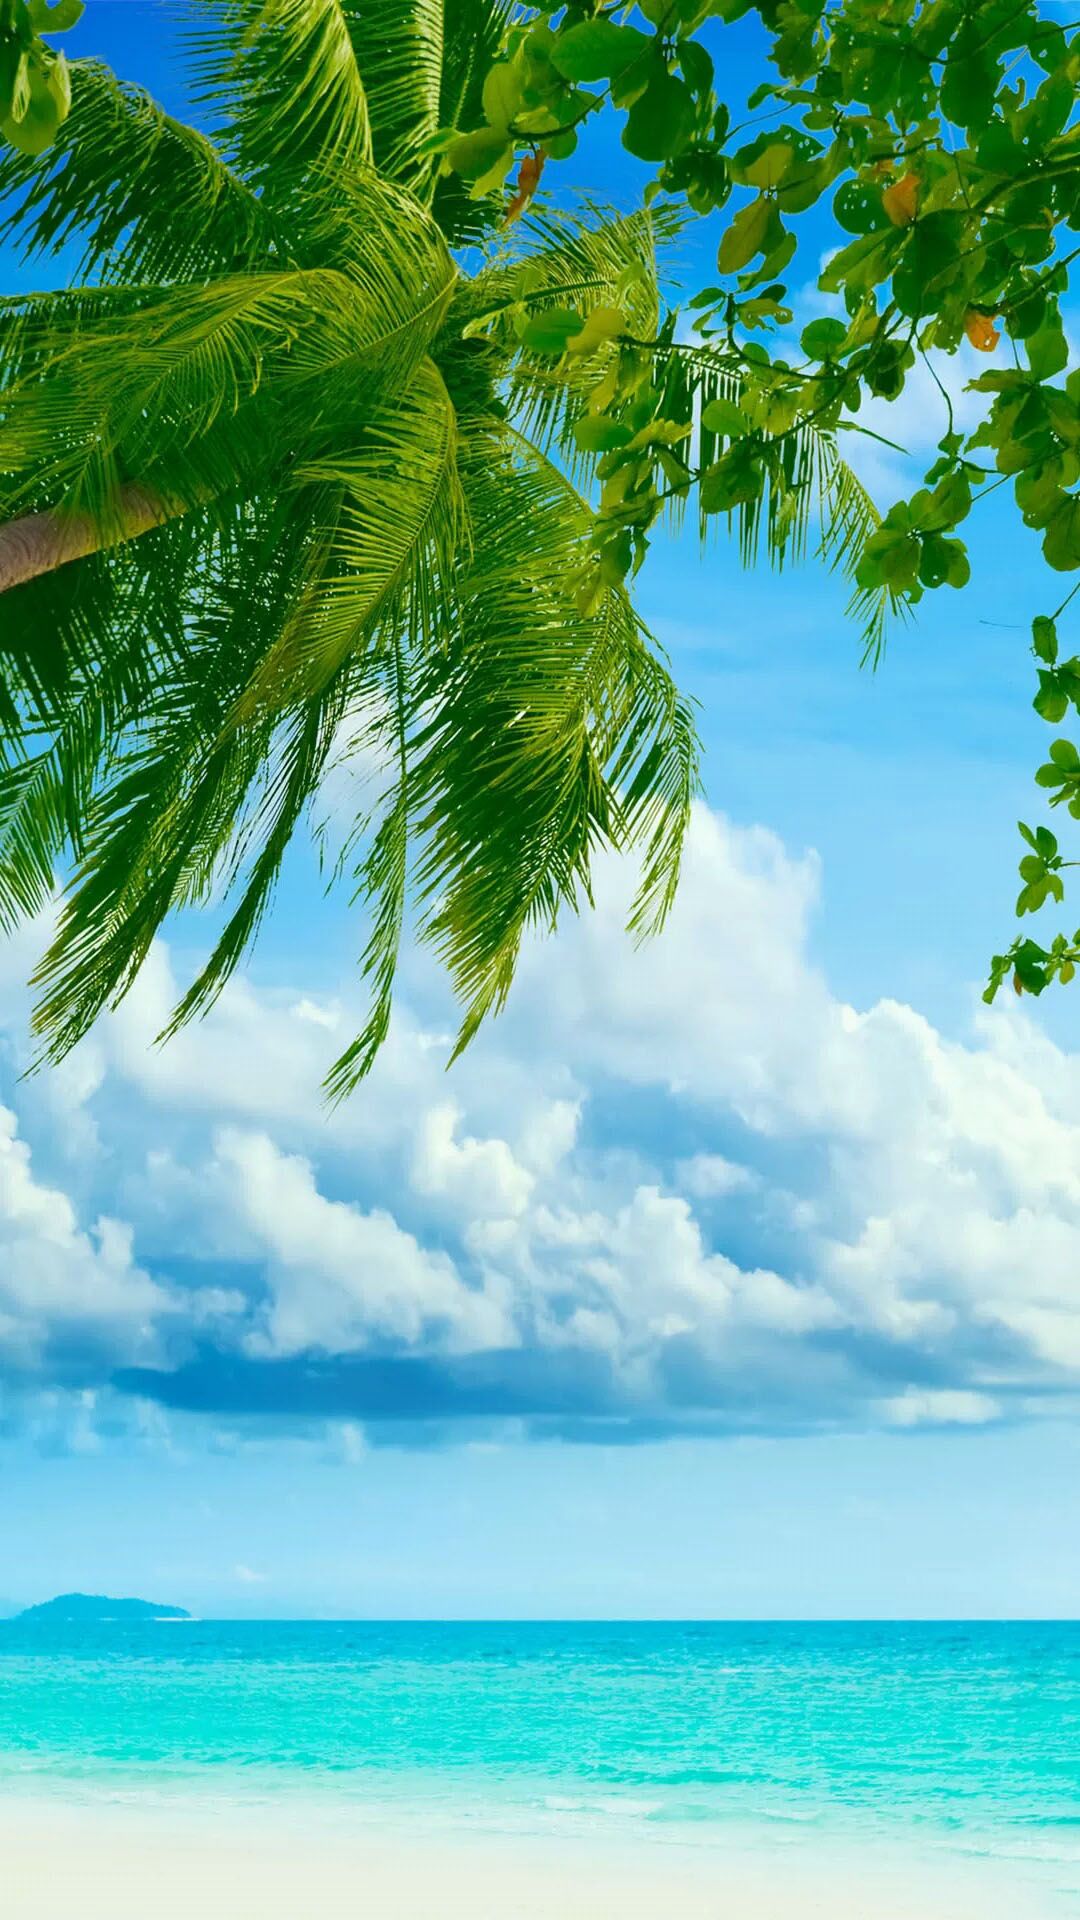 Free download Tropical Beach Coconut Tree Android Wallpaper